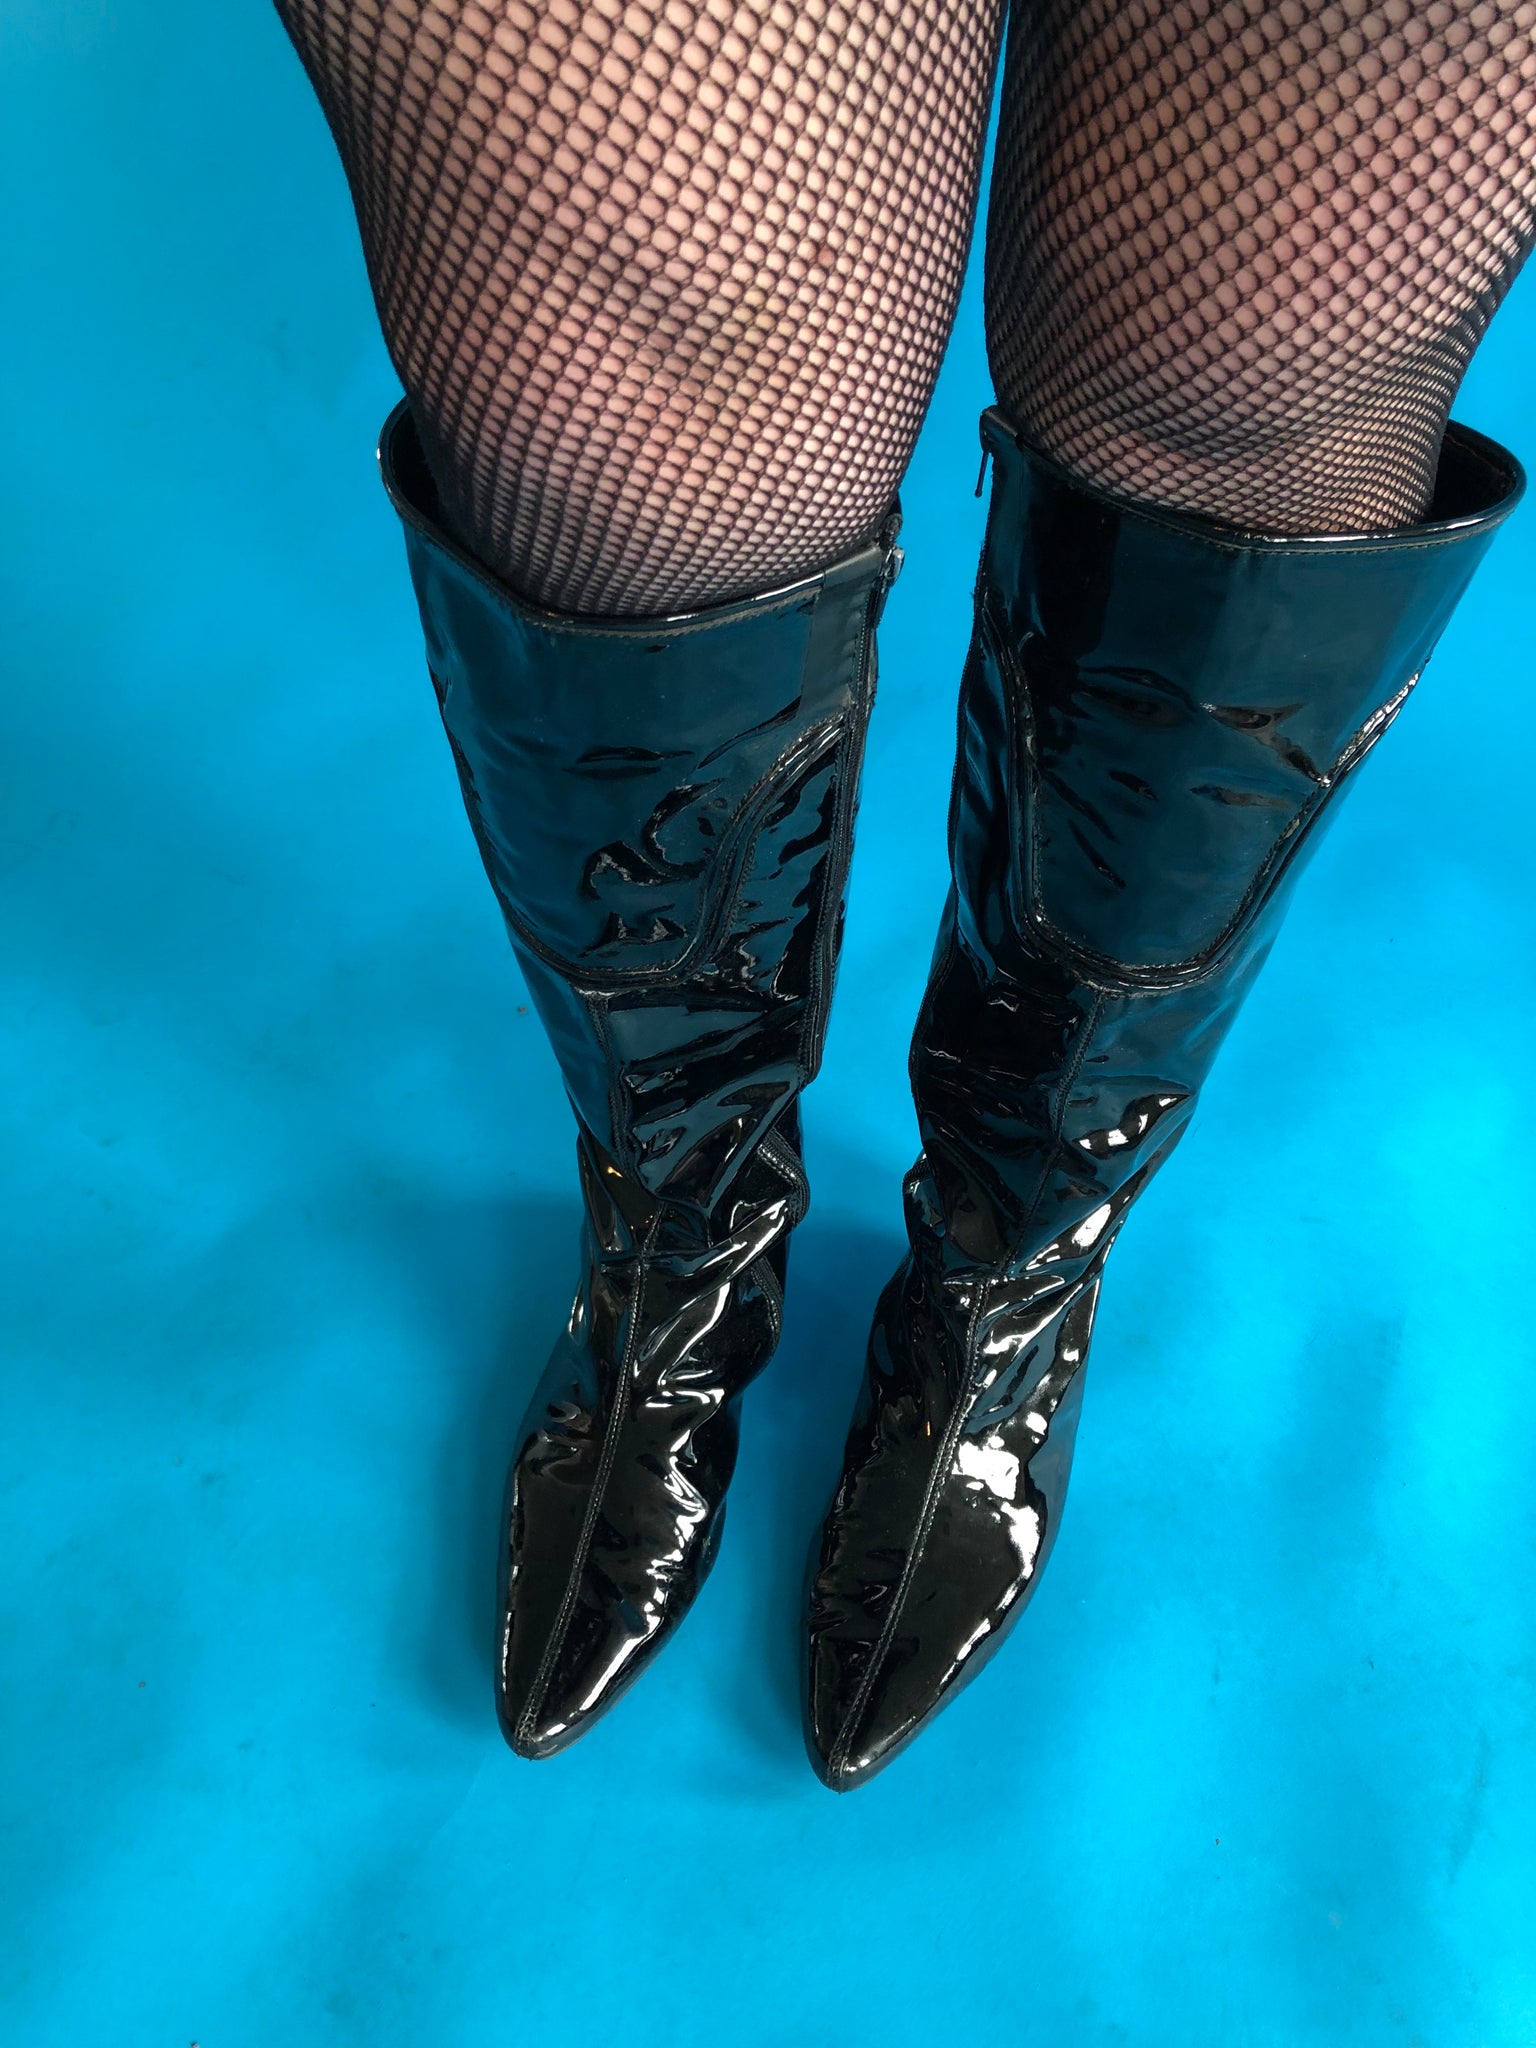 Black Patent Leather Knee High Boots